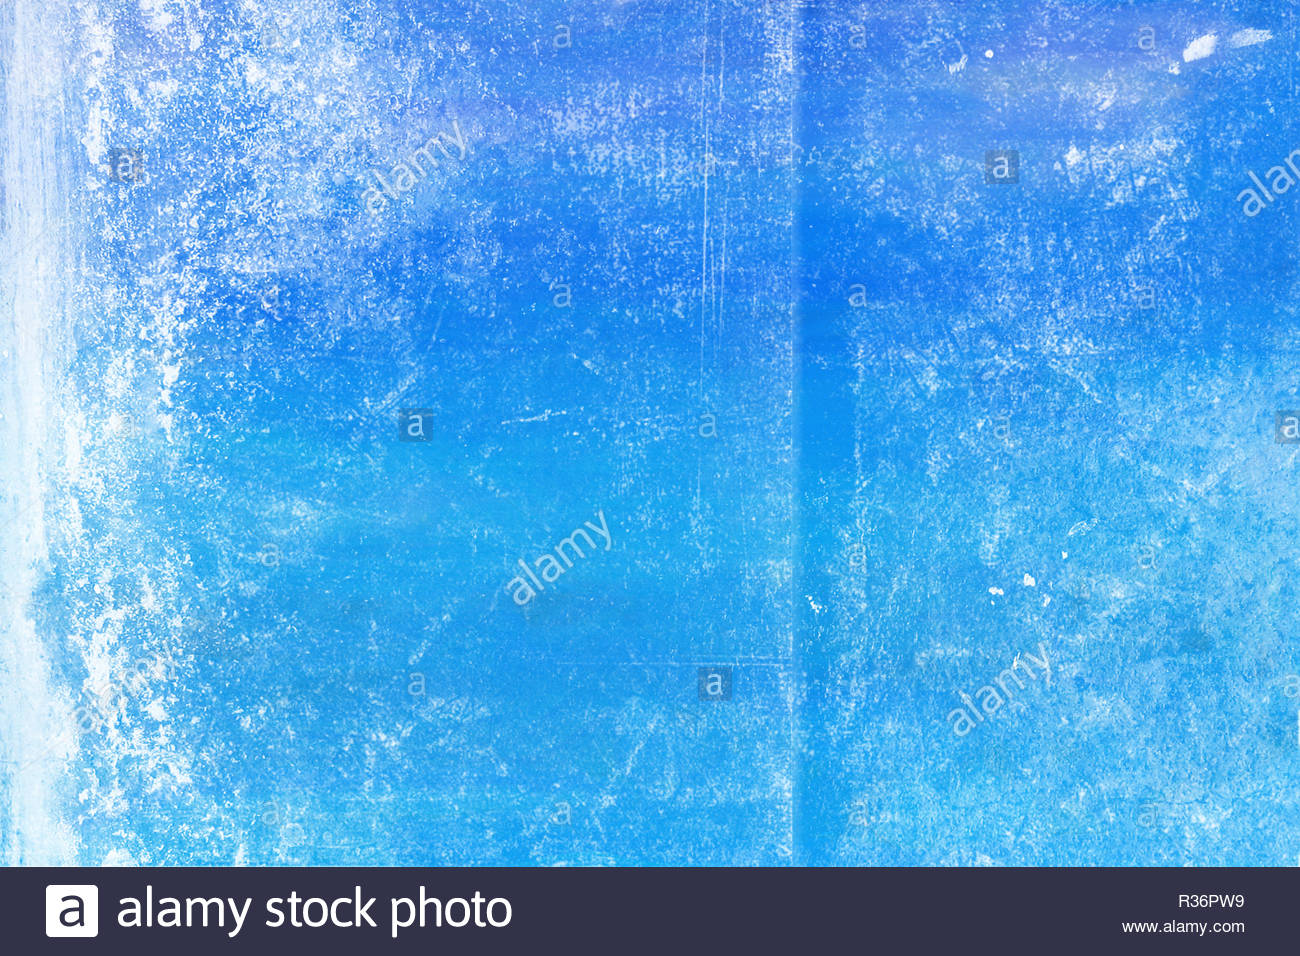 Background Wallpaper Putty With Blue Textured Surface Stock Photo